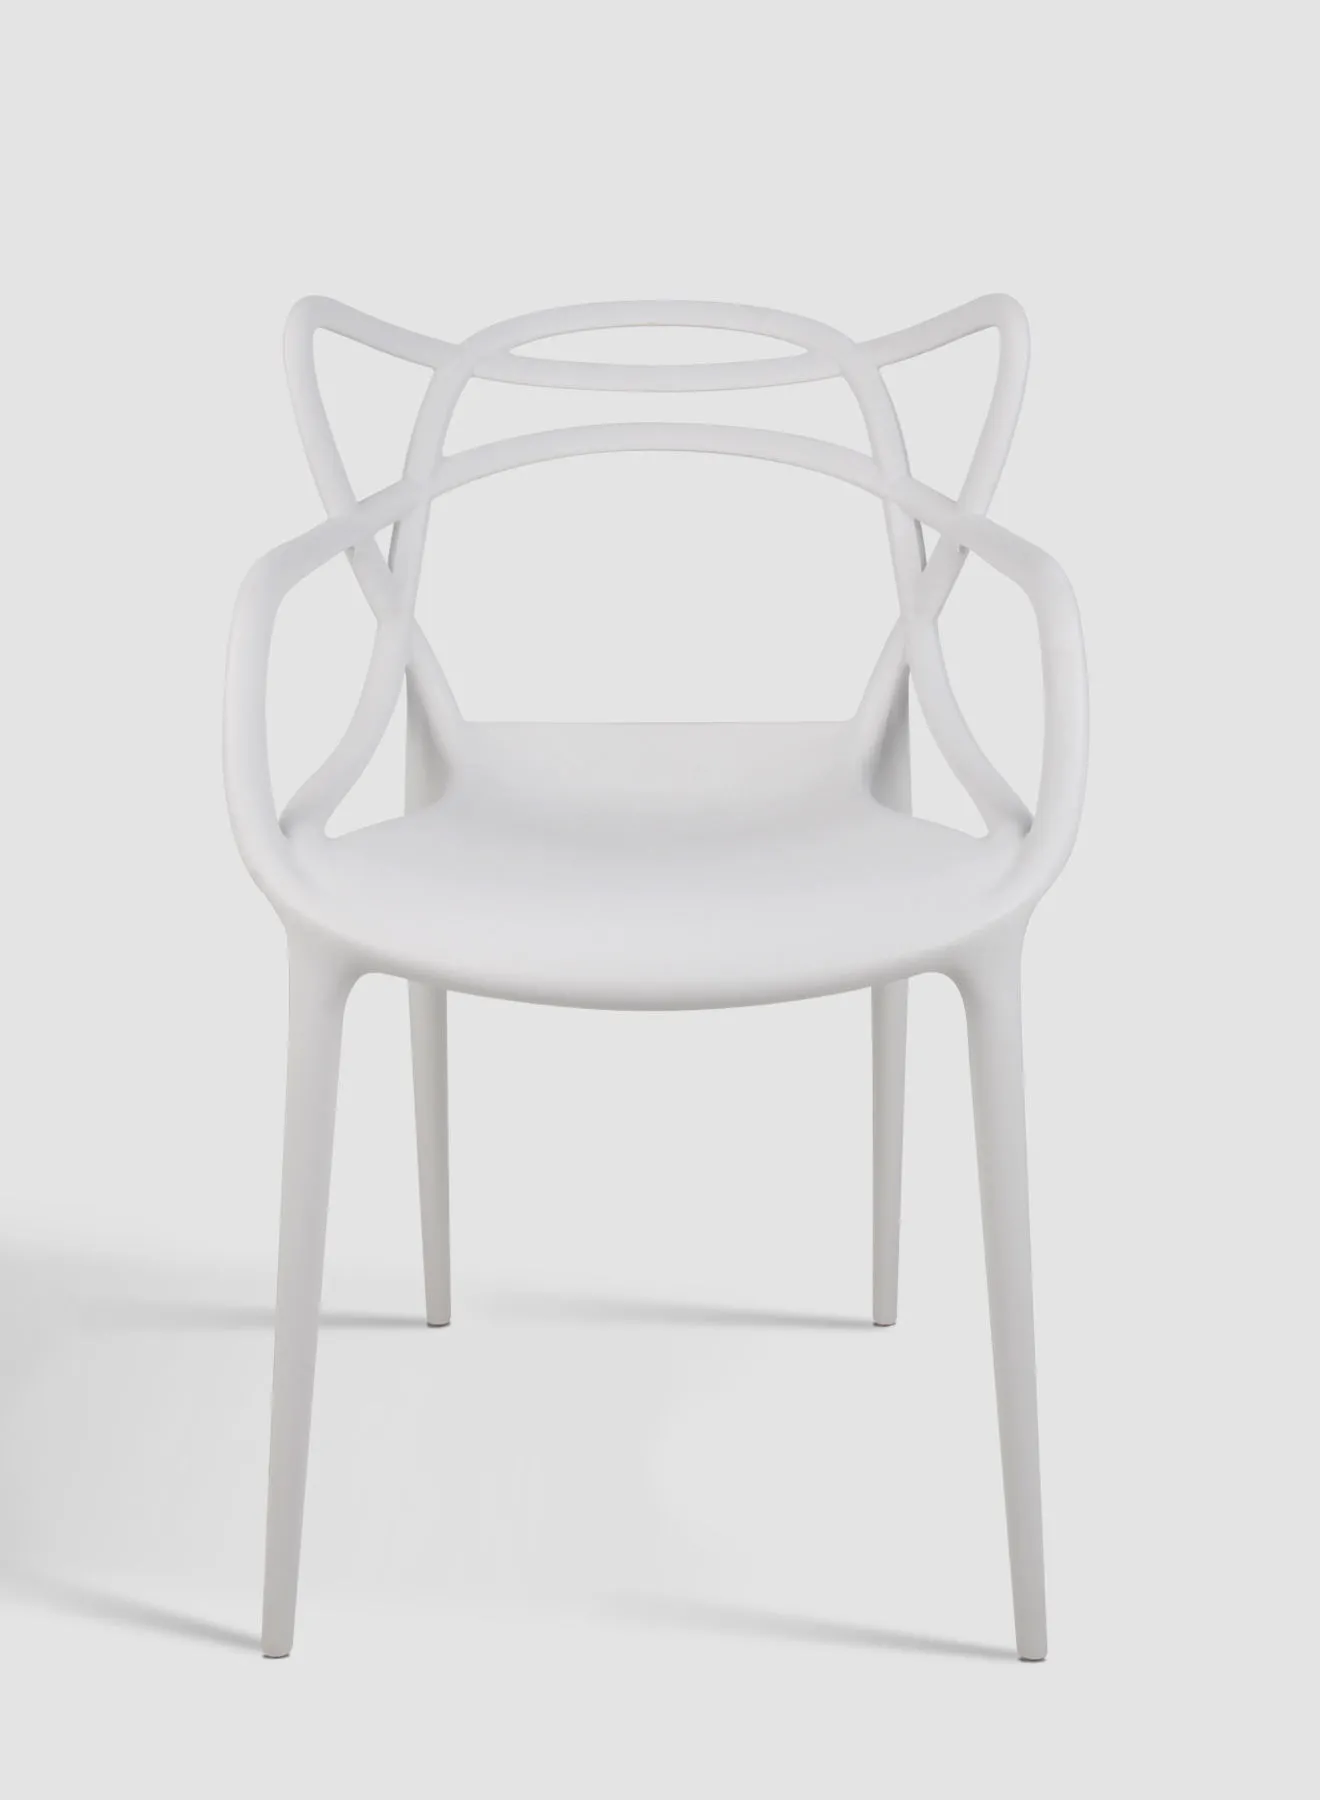 Switch Dining Chair In White Plastic Chair Size 57 X 53 X 82